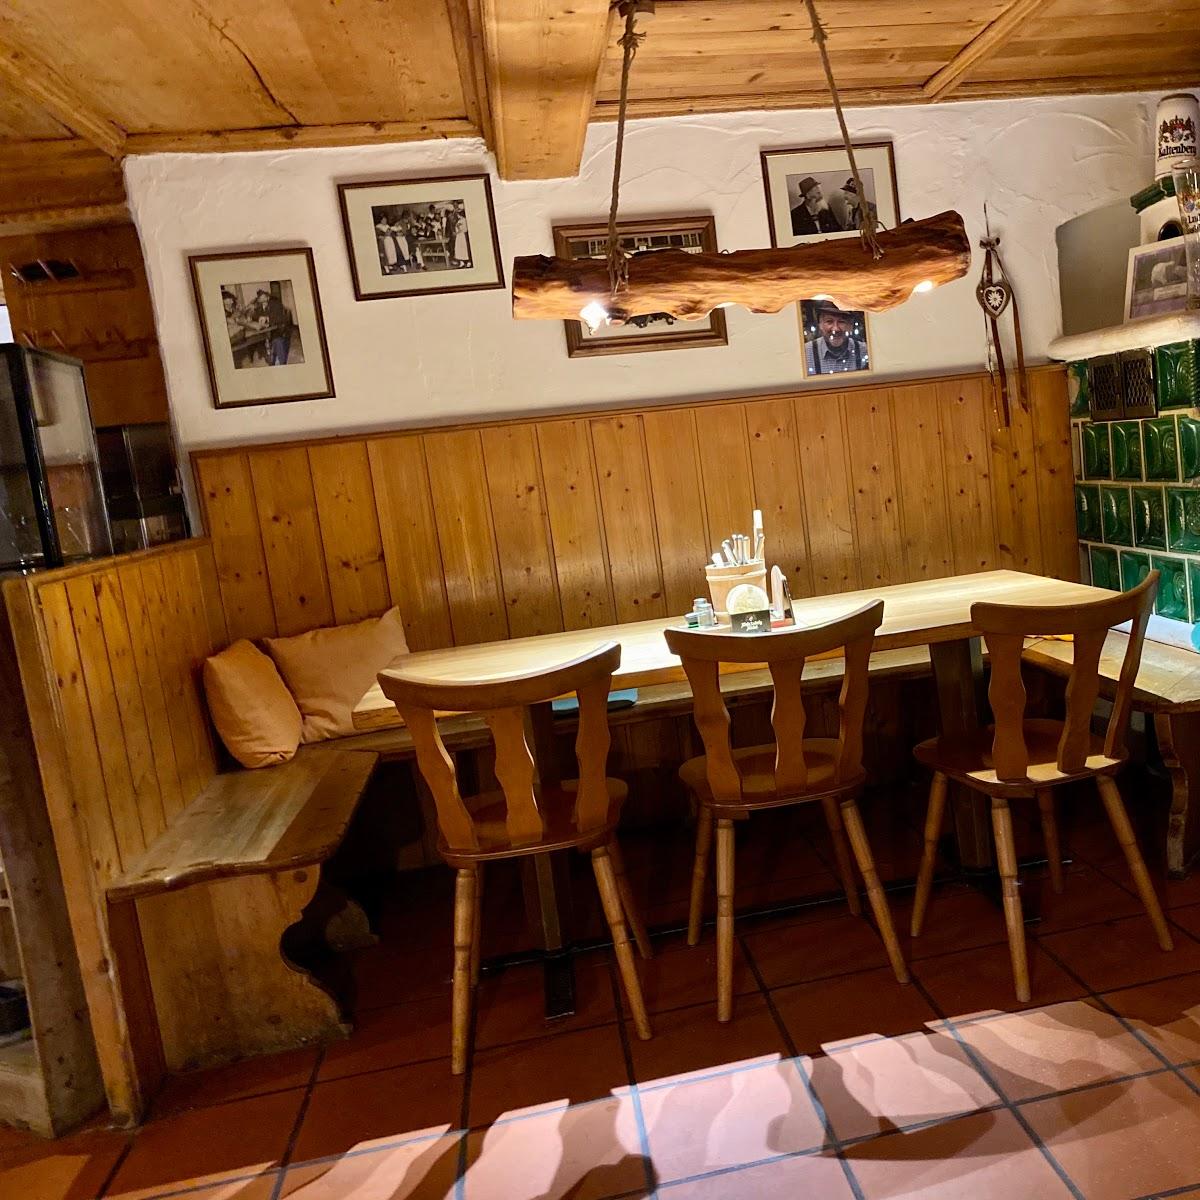 Restaurant "Draxl-Stüberl" in  Lenggries